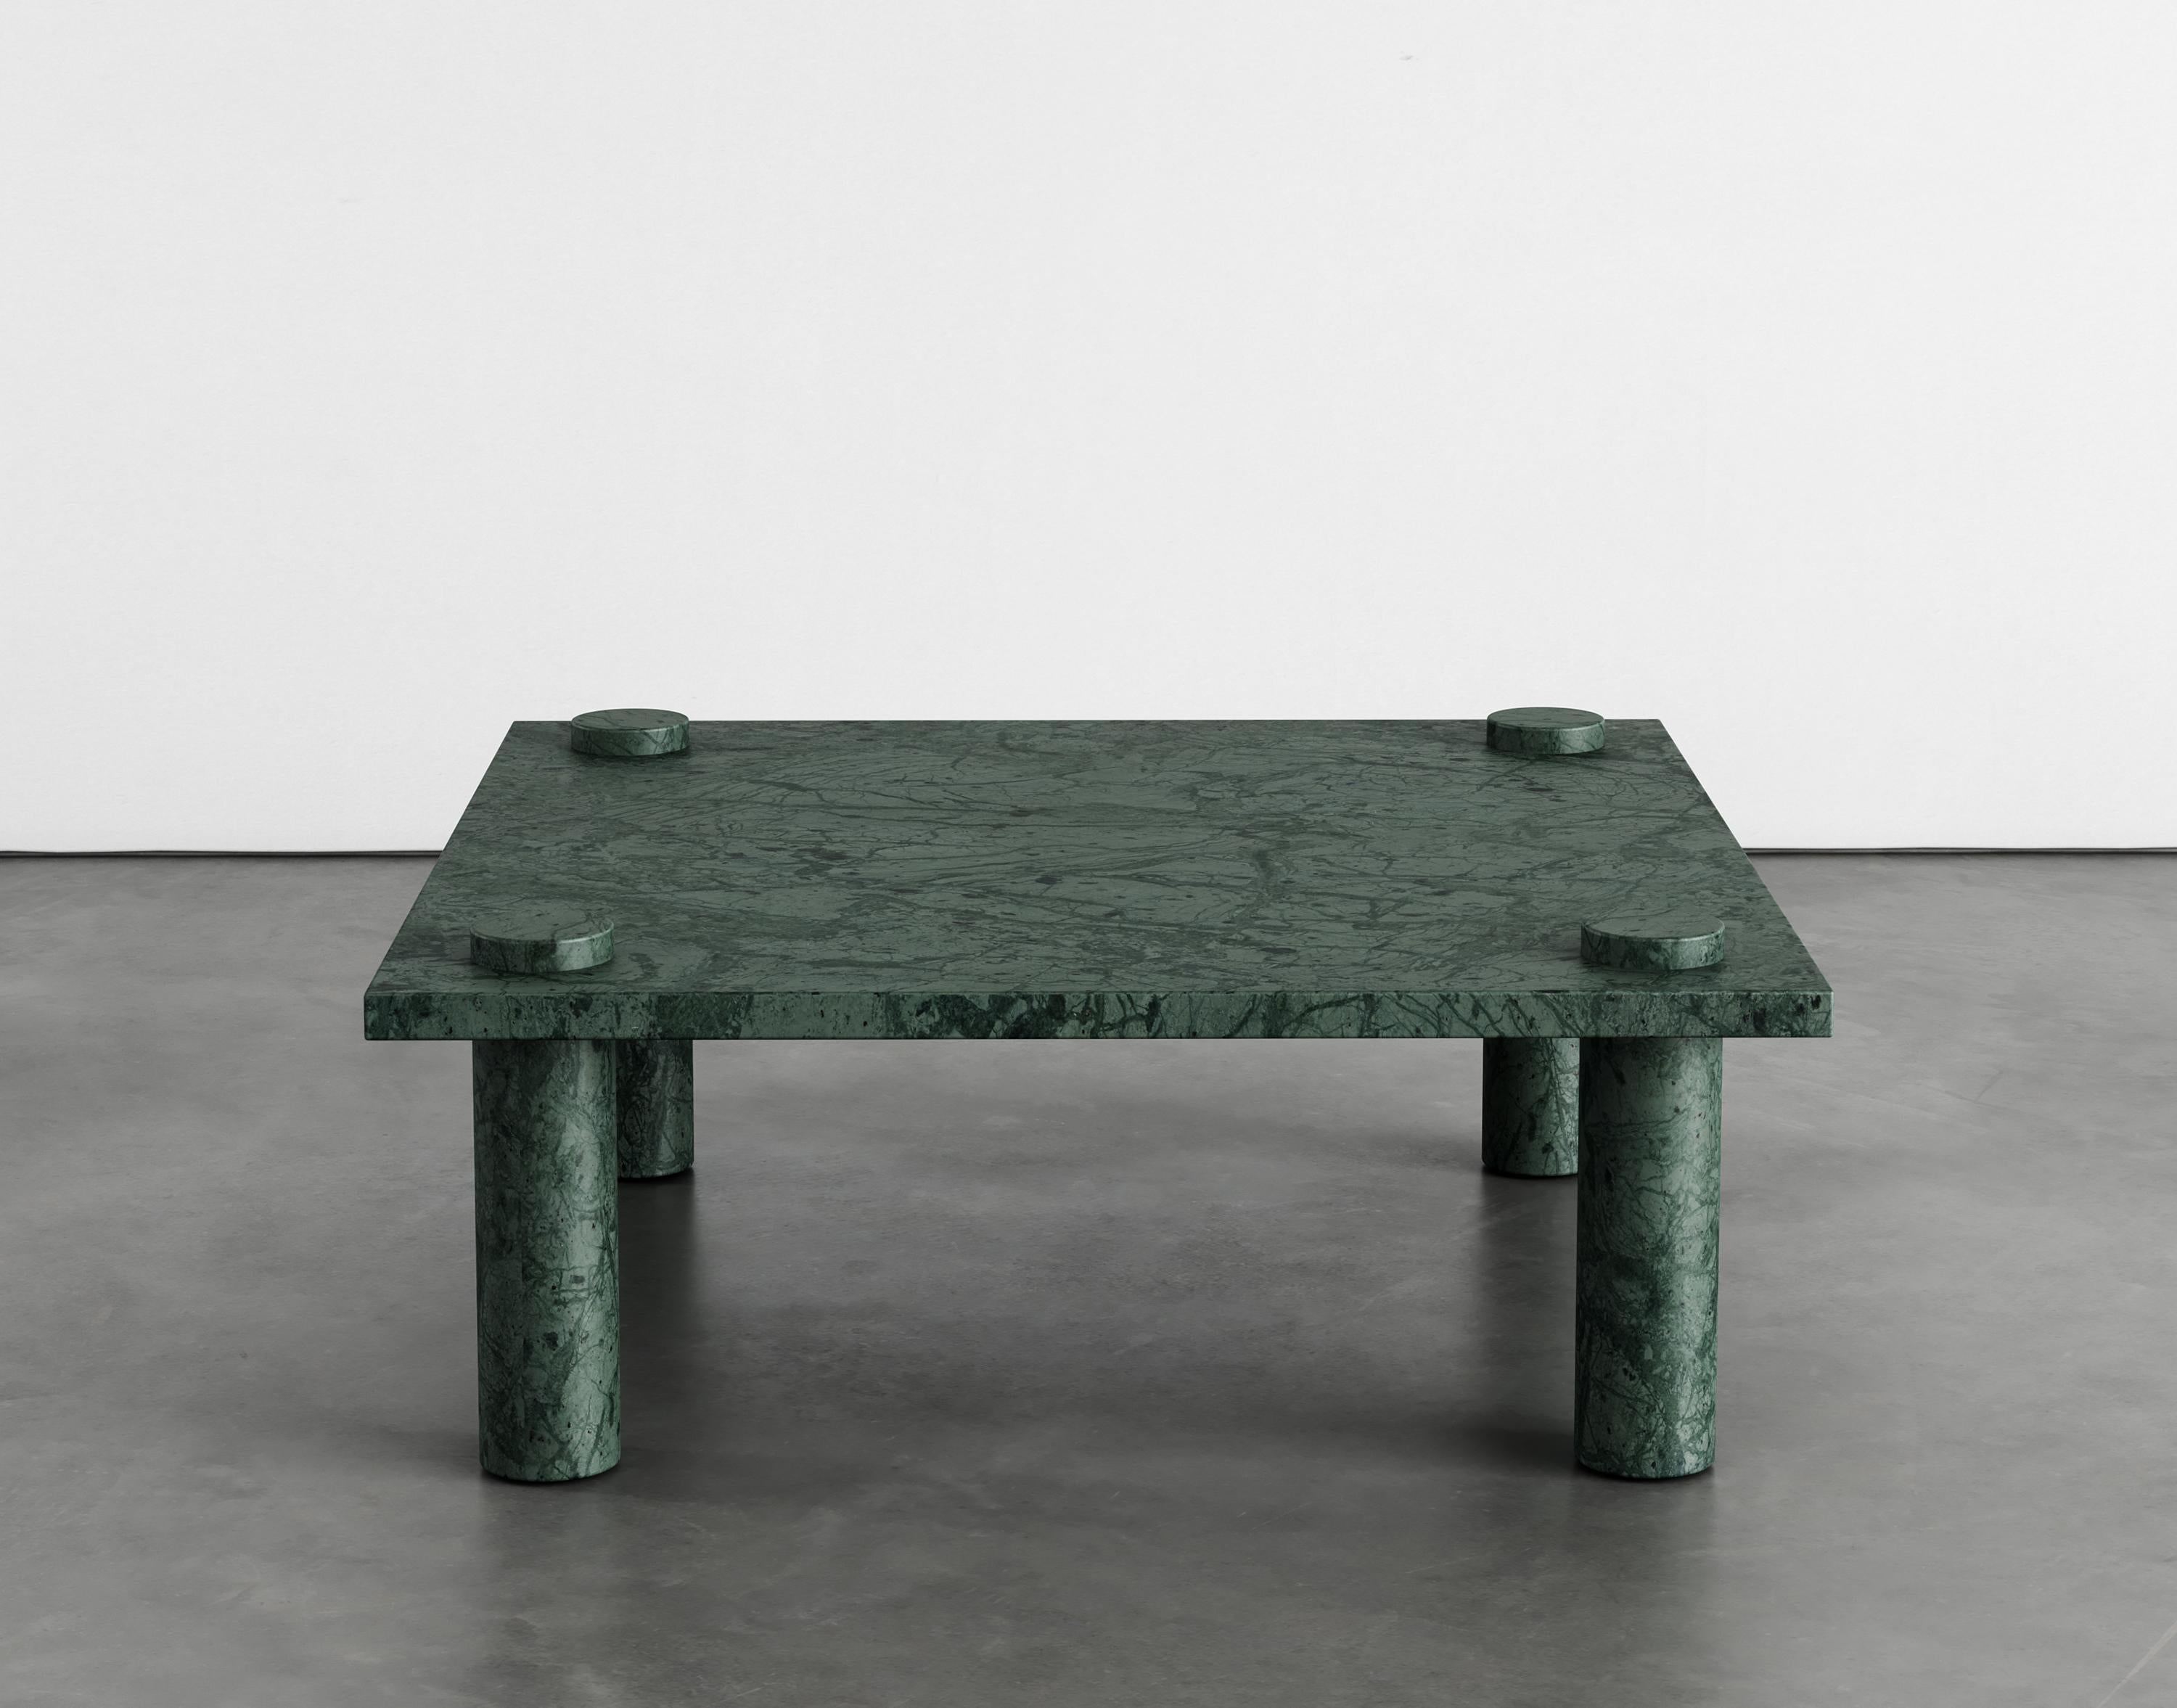 Simon marble coffee table by Agglomerati
Dimensions: D 90 x W 90 x H 33 cm
Materials: Guatemala Green marble
Available in other stones.

Simon Coffee Table has minimalist, architectural details that give an appearance of legs piercing through